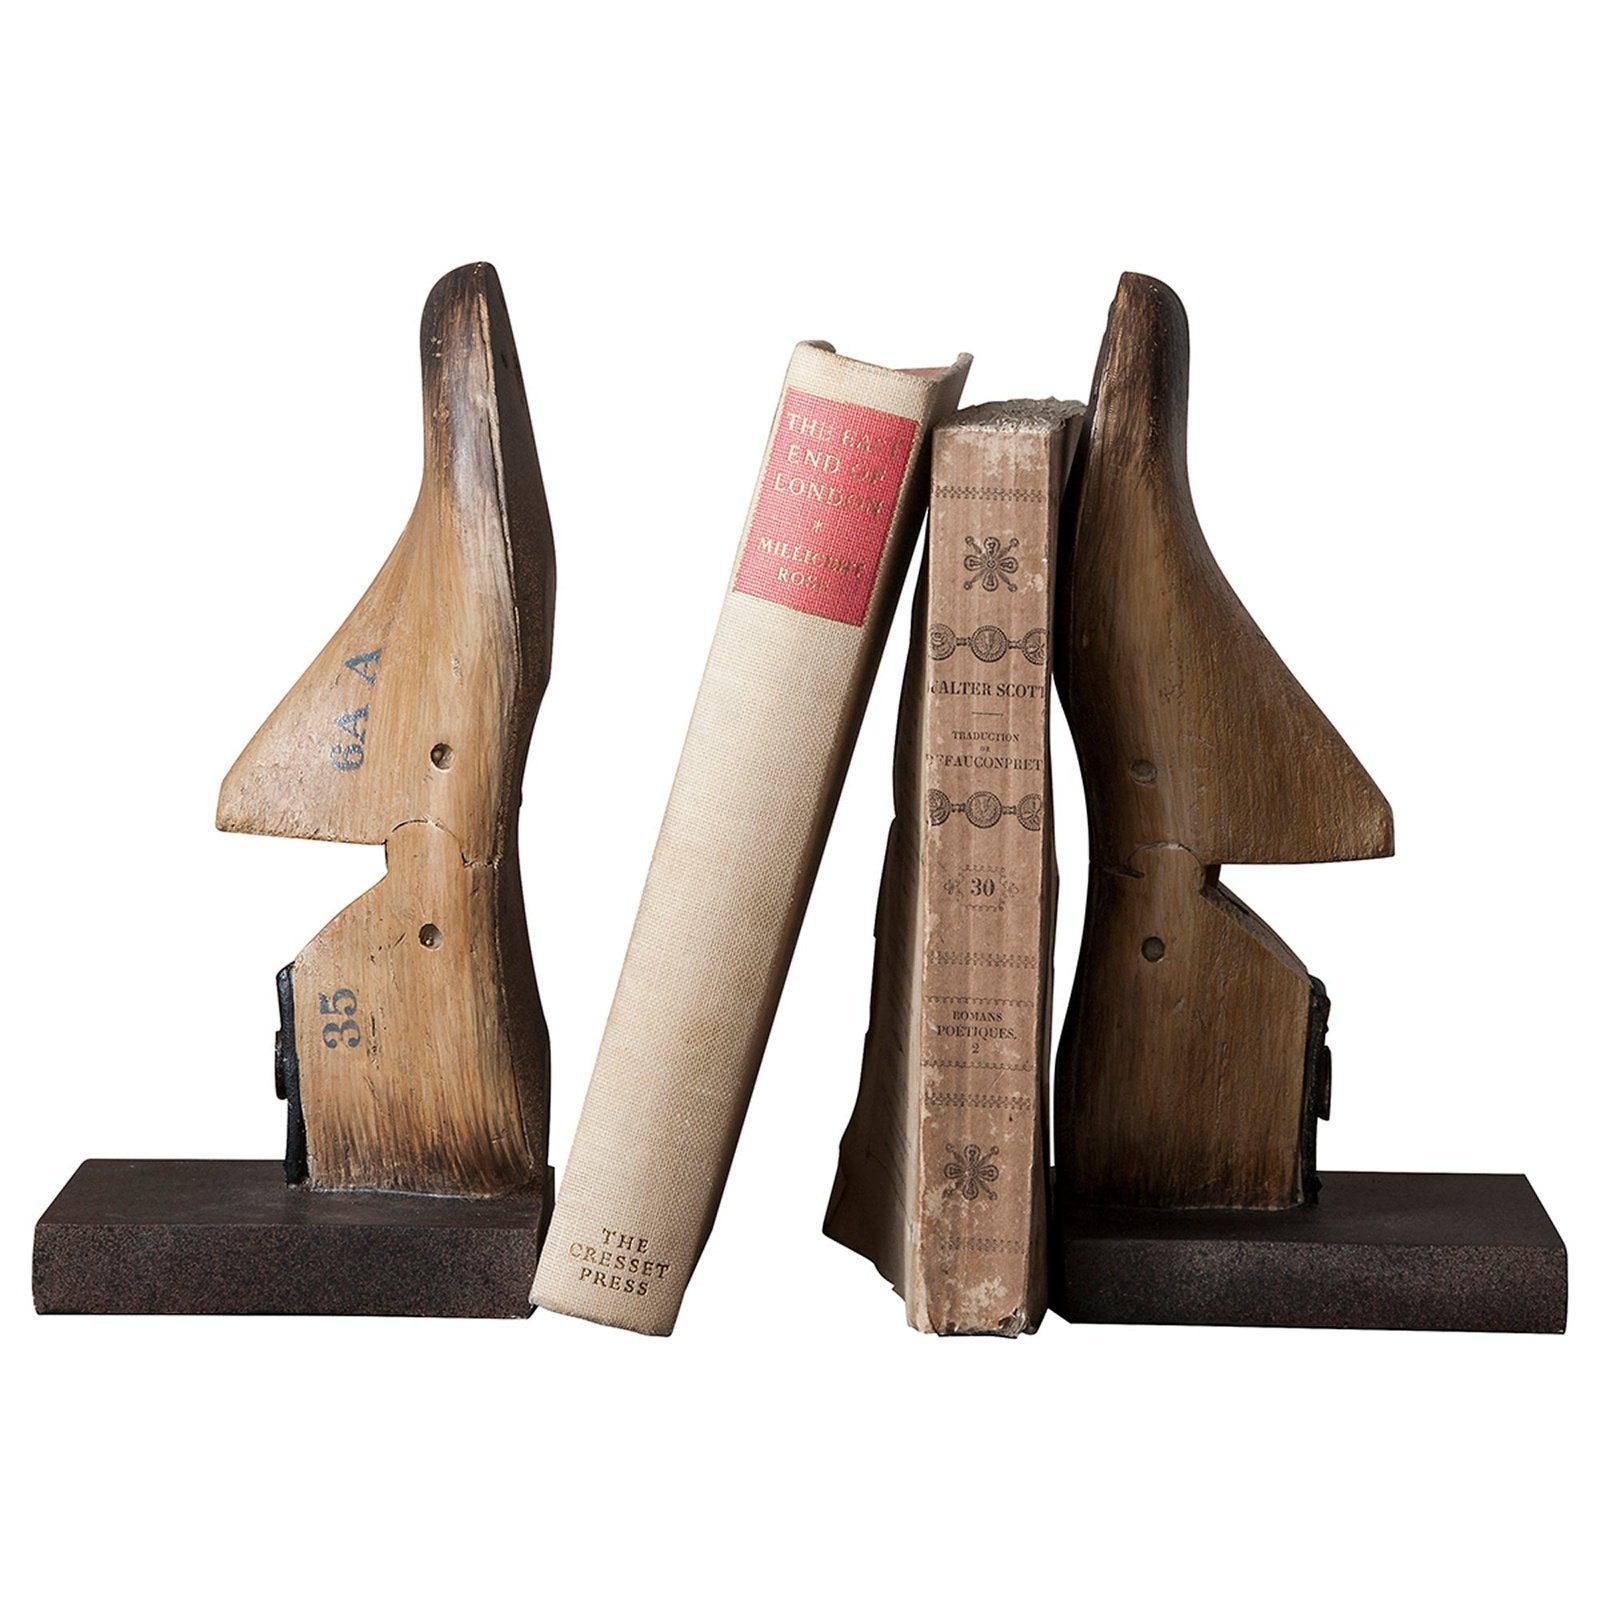 Upcycled Vintage Shoe Stretcher Bookends